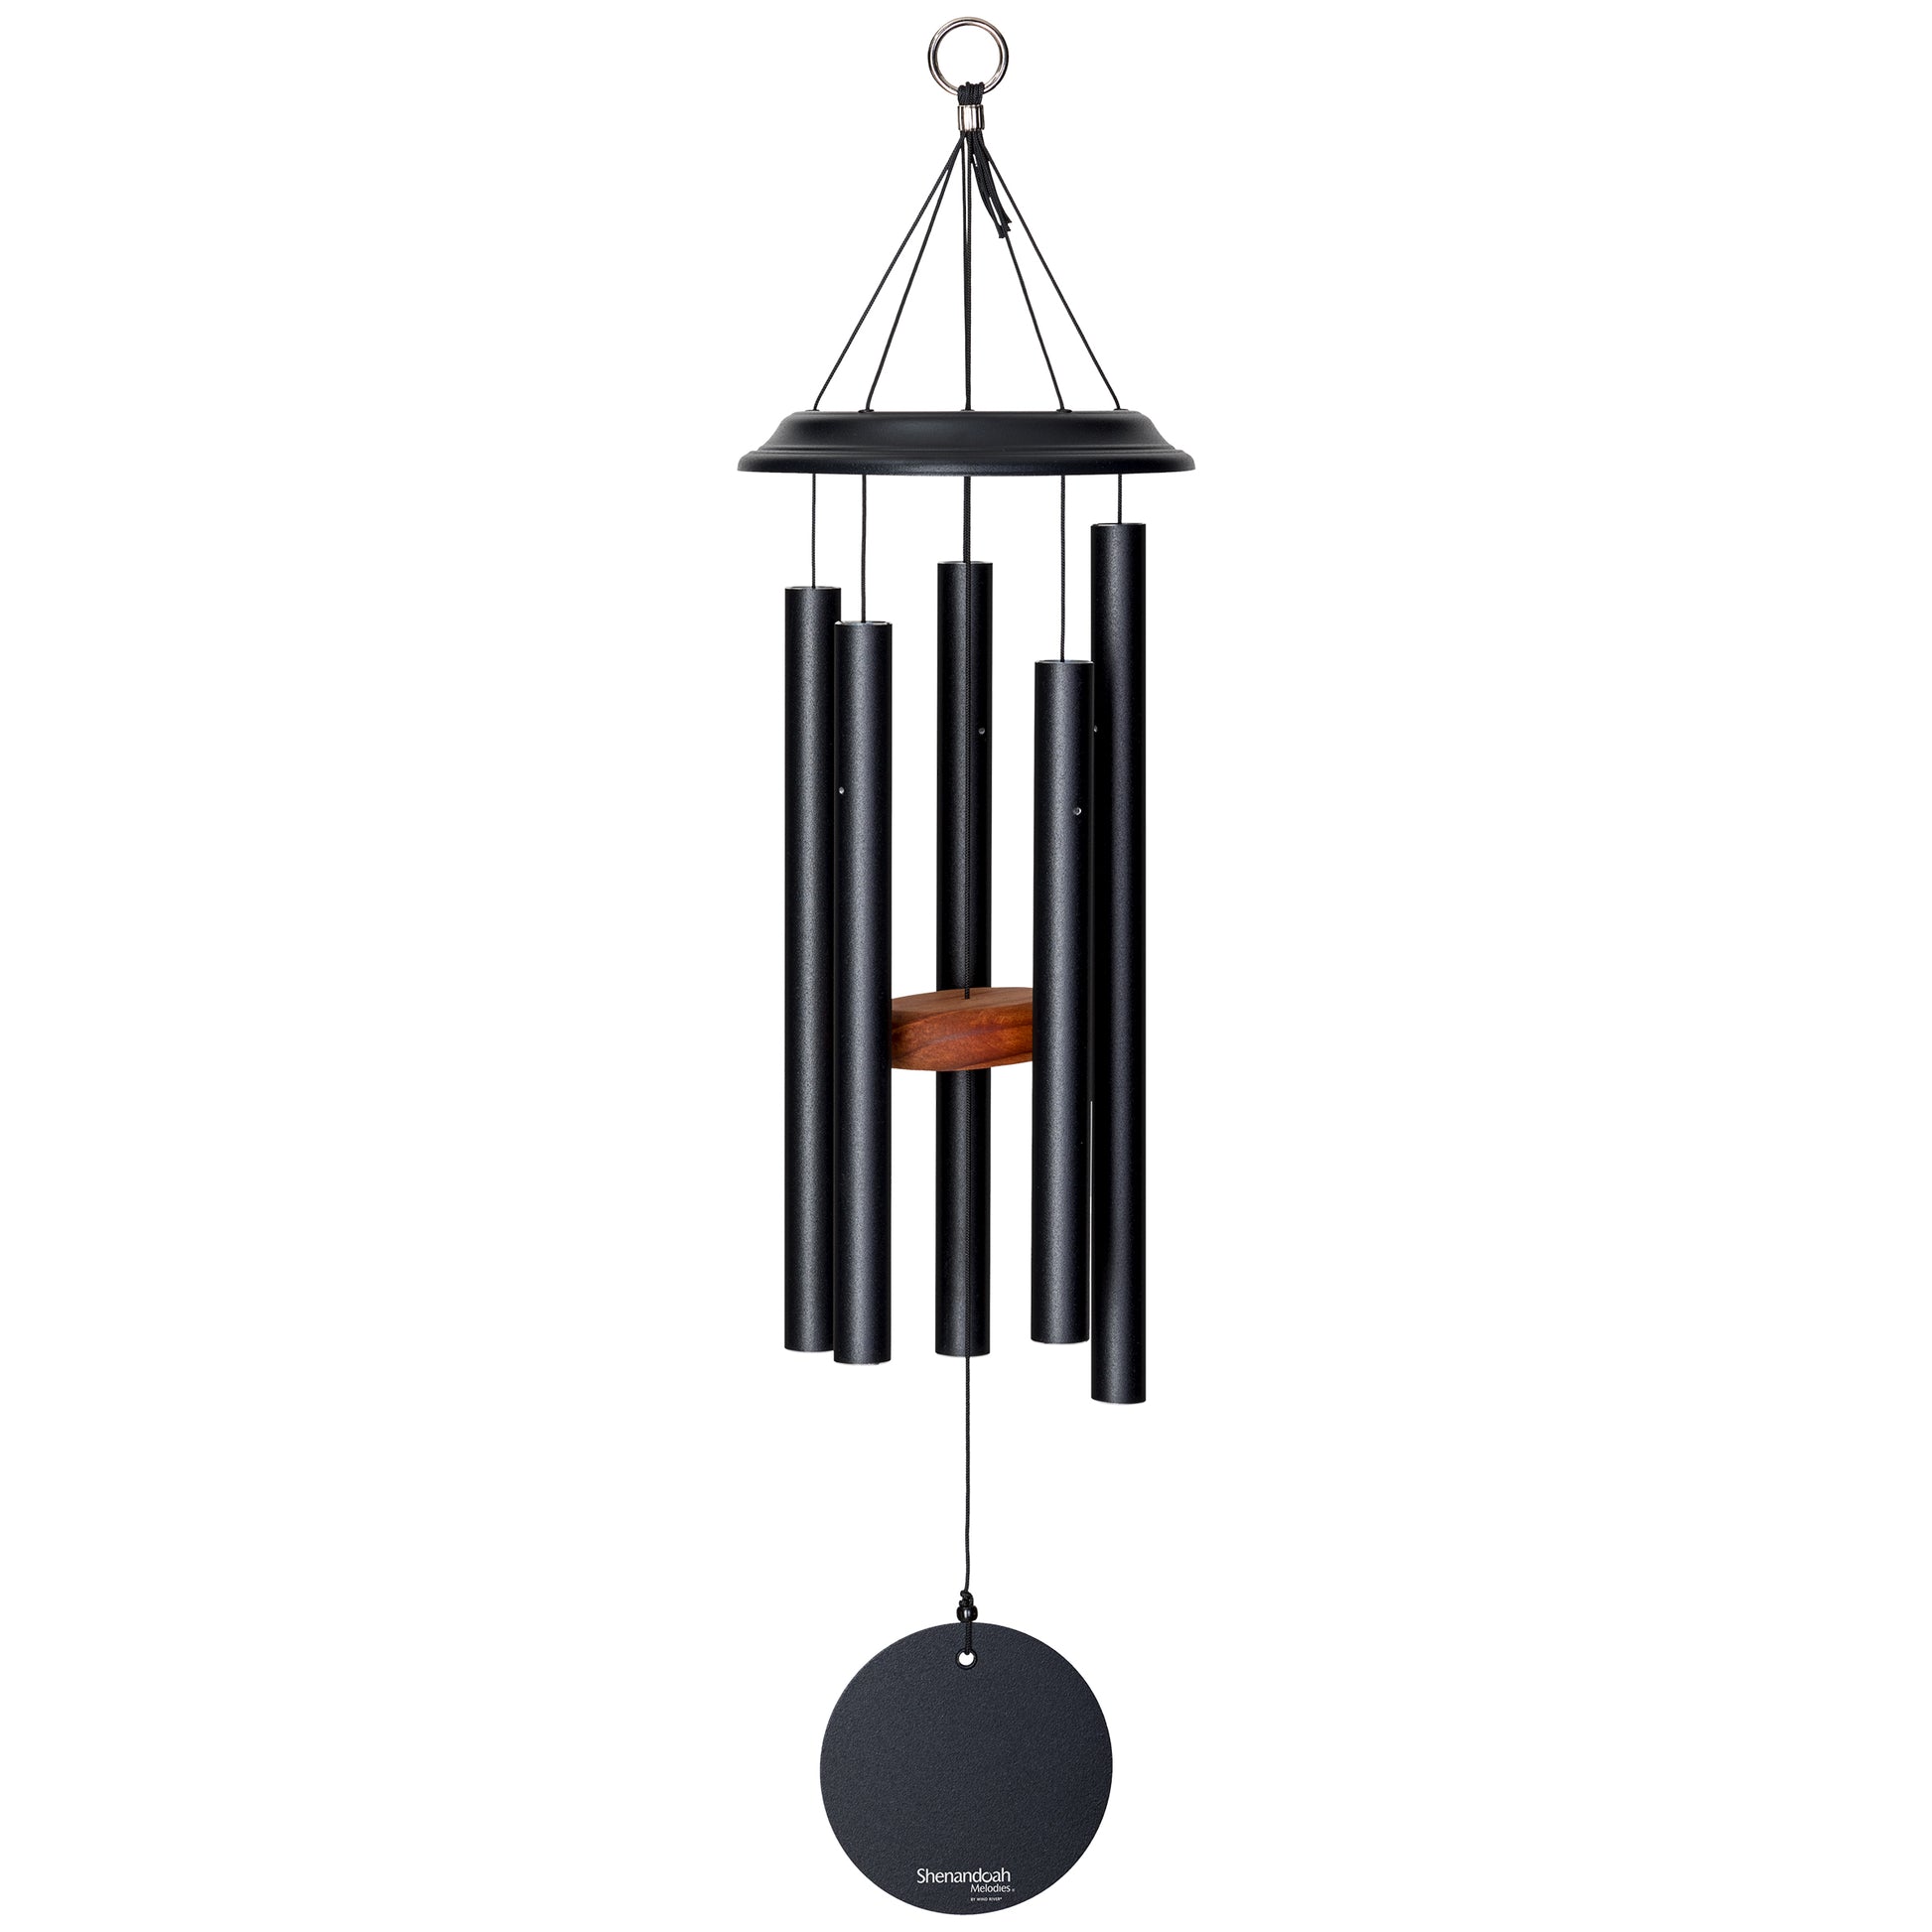  These Black Wind River Shenandoah Melodies wind chimes from Home and Garden Treasures are crafted with six hollow tubes of varying sizes suspended from a central ring, creating enchanting melodies as they dance in the breeze. Complete with a stylish round metal sail that catches gentle winds, each Shenandoah Melodies exemplifies the calming song of the Virginia countryside. Elevate your garden retreat with the perfect gift today!